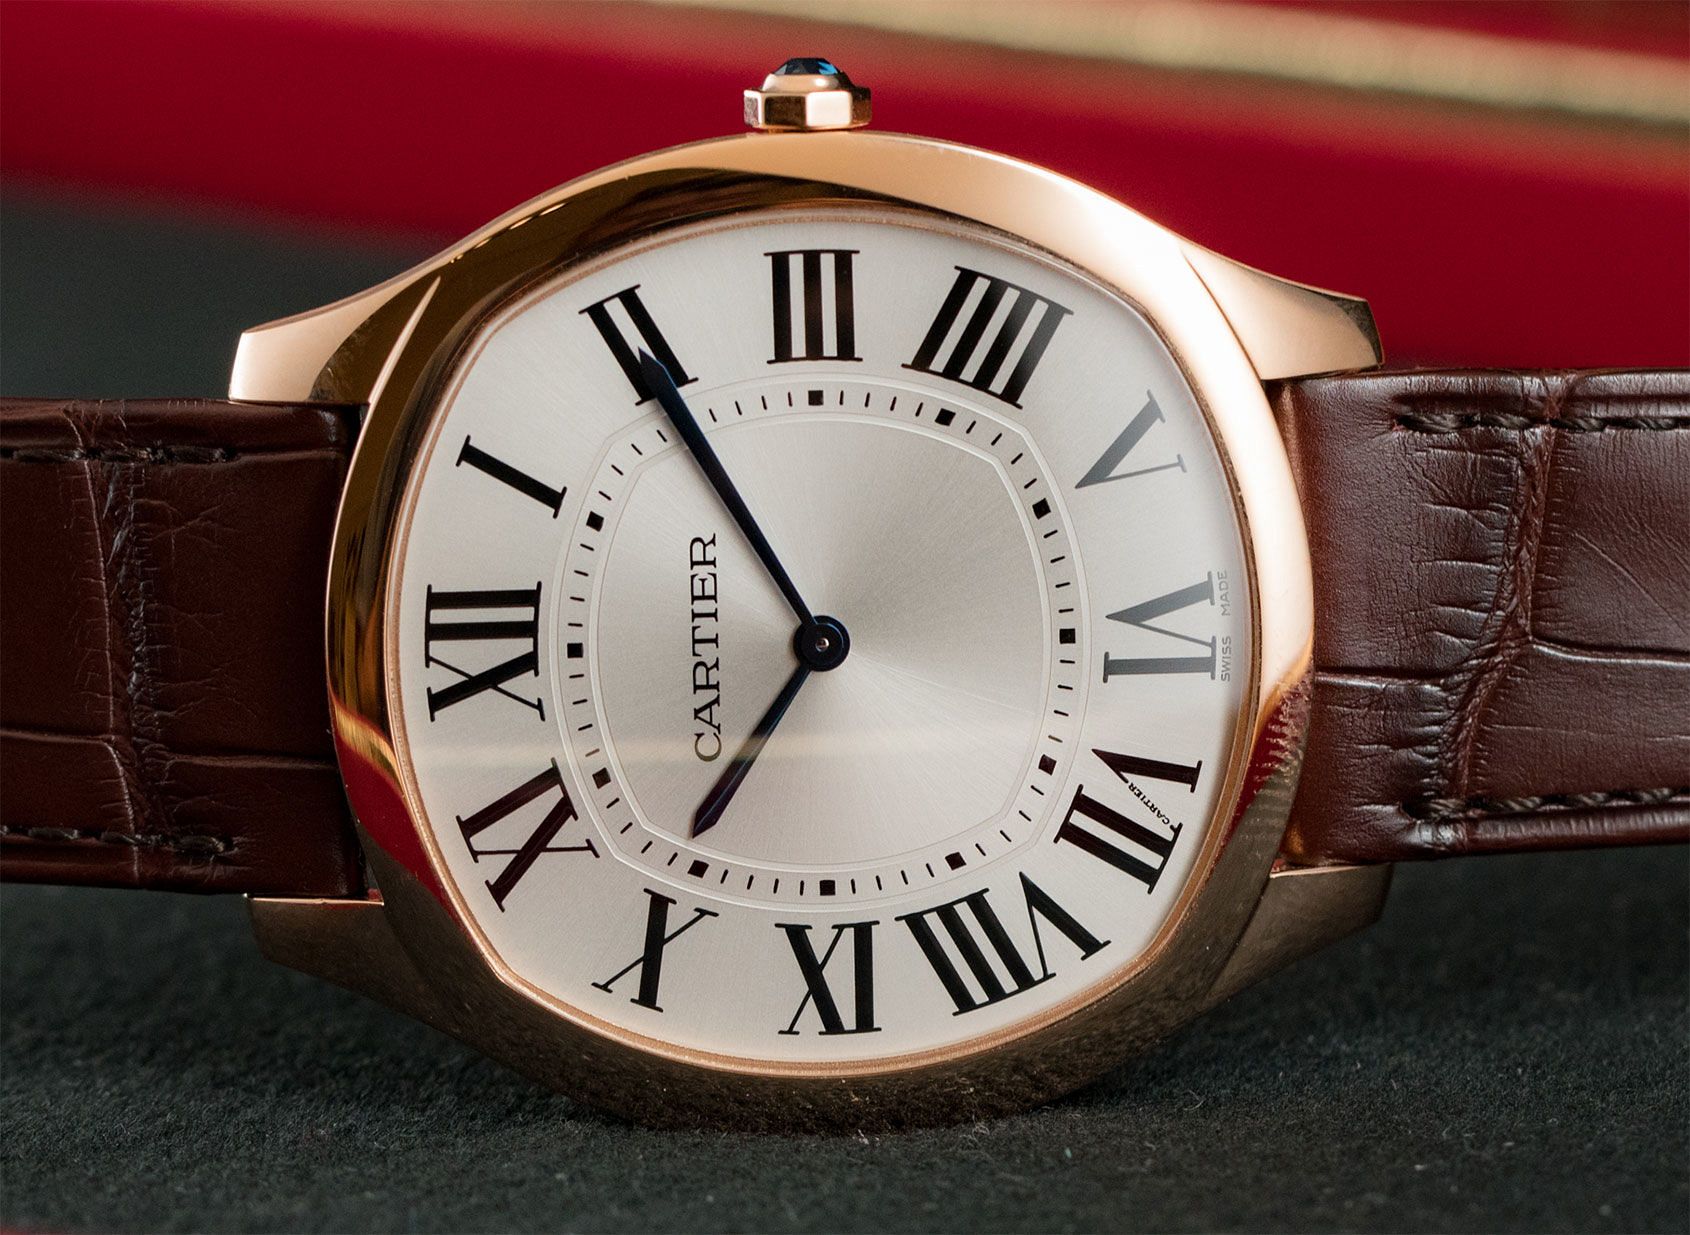 Cartier SIHH 2017 Collection - The Best 